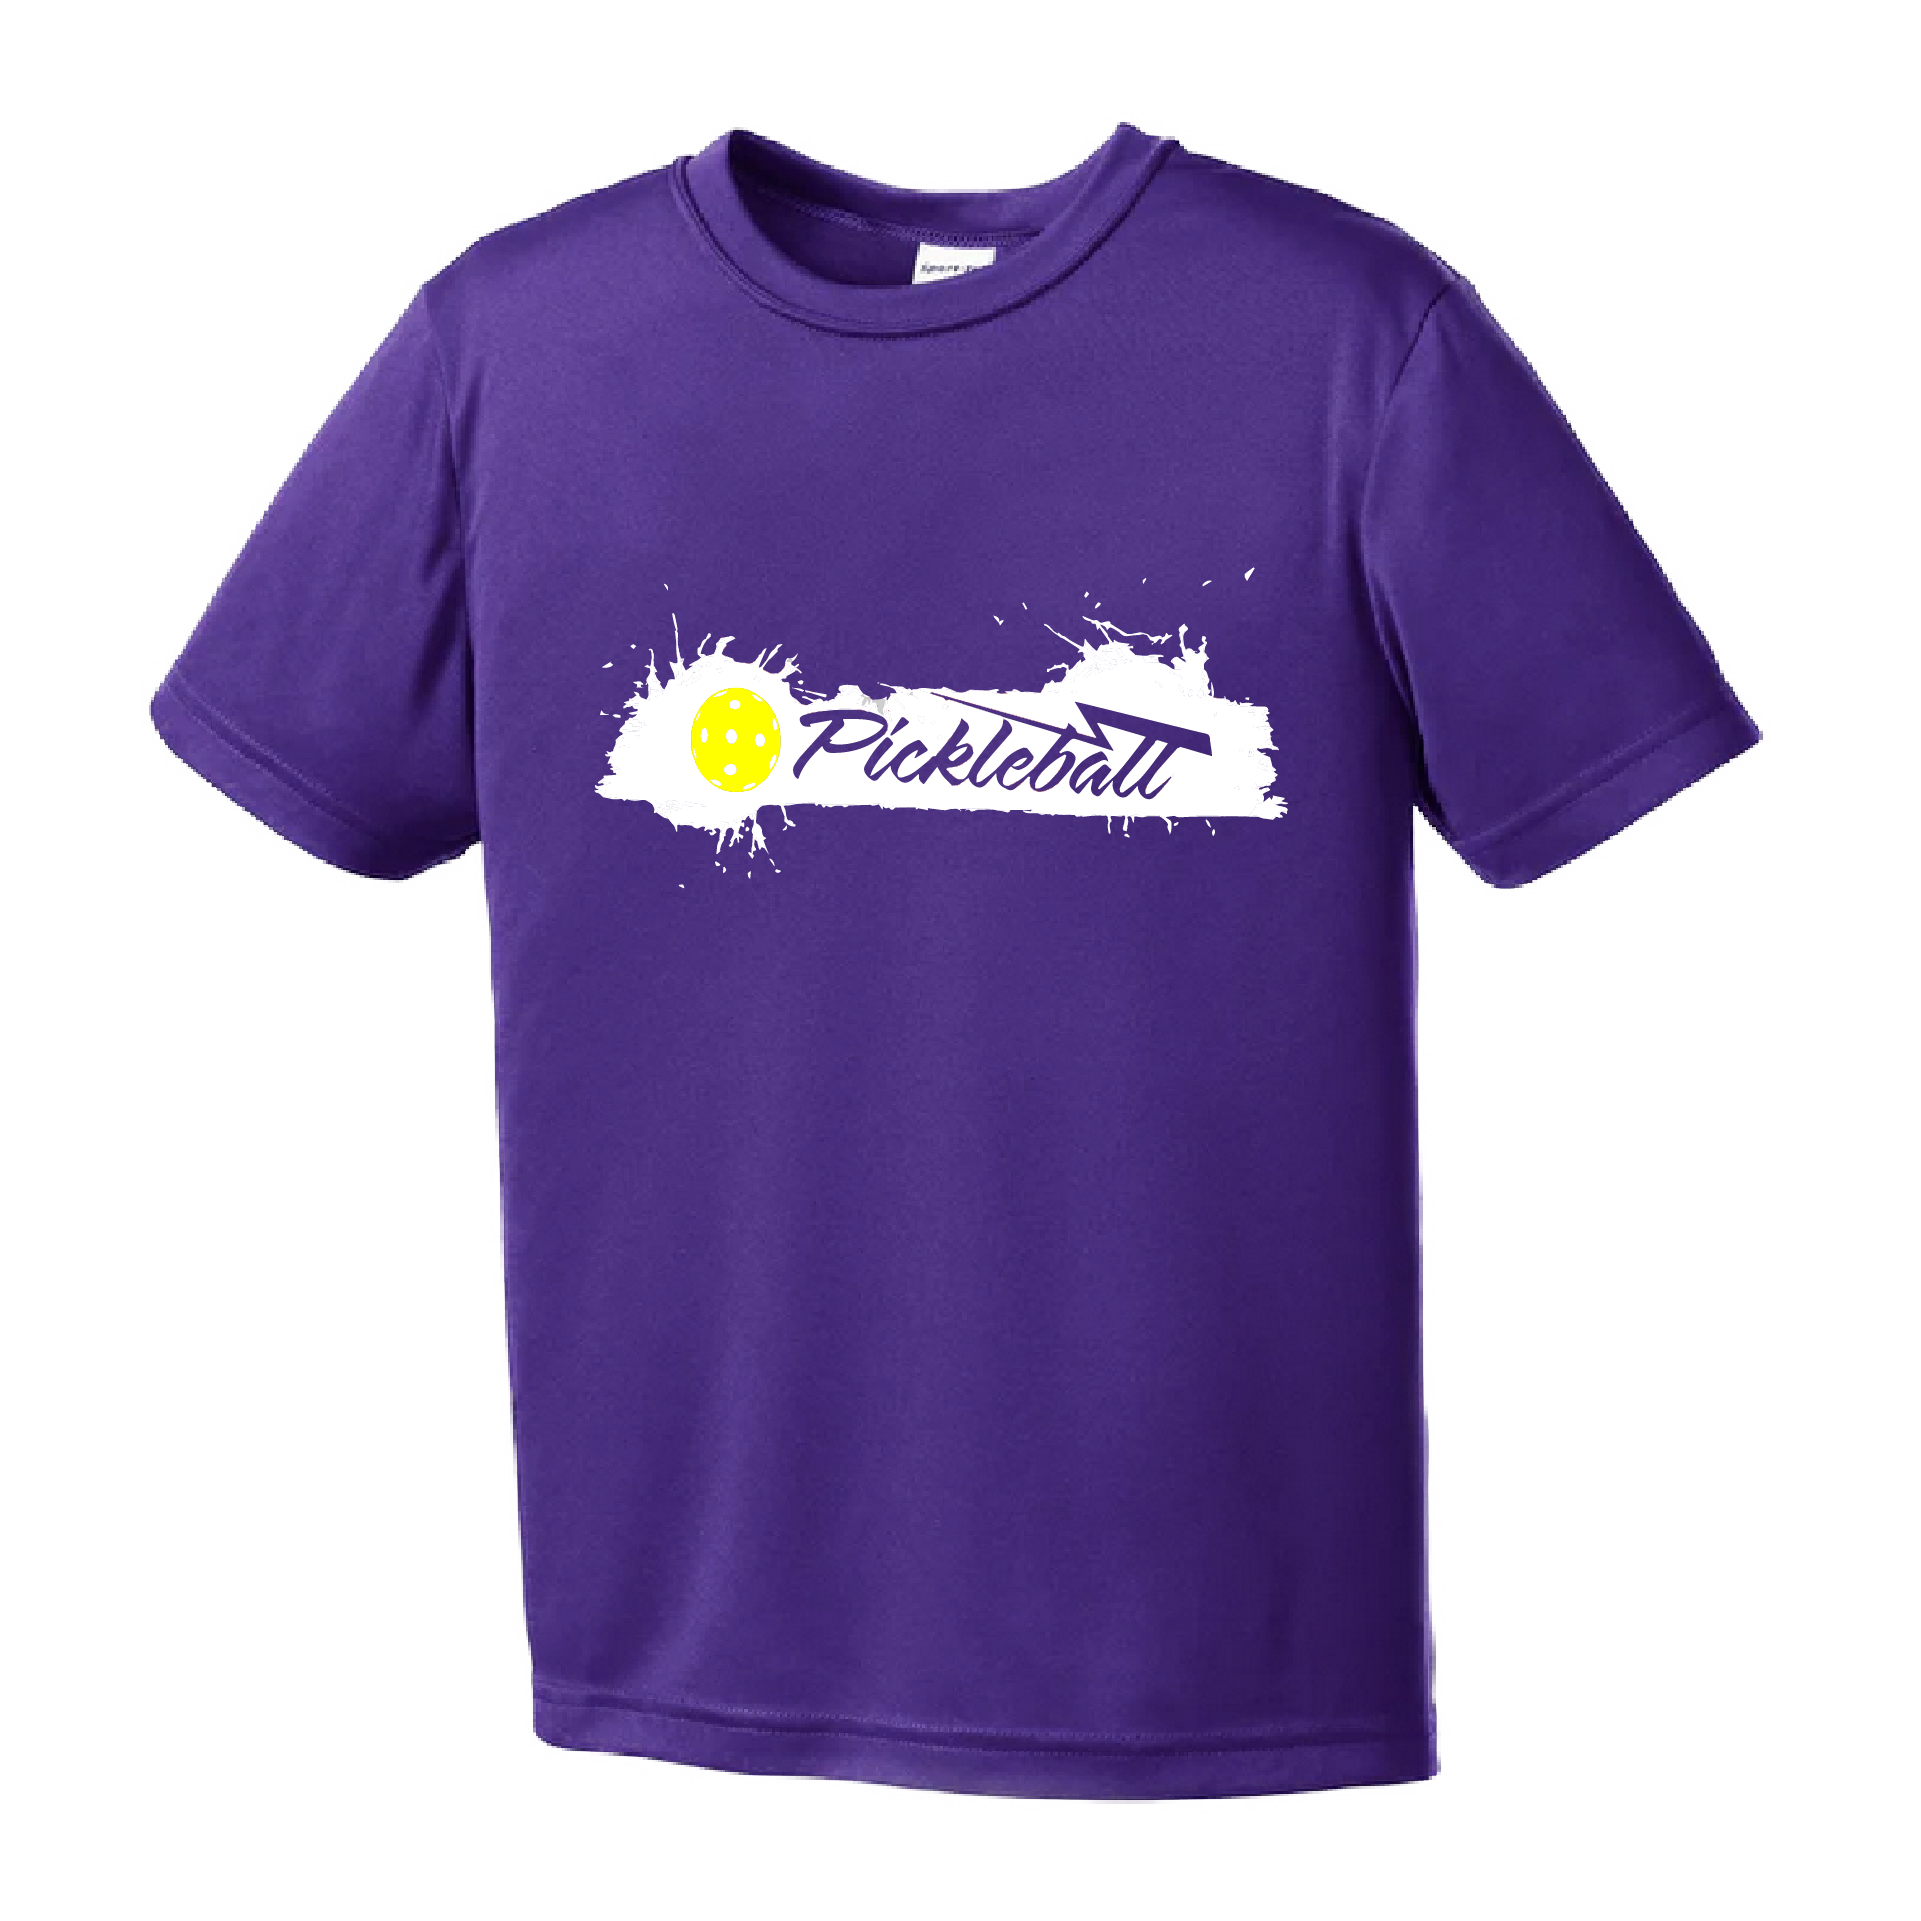 Pickleball Design: Extreme  Youth Style: Short Sleeve  Shirts are lightweight, roomy and highly breathable. These moisture-wicking shirts are designed for athletic performance. They feature PosiCharge technology to lock in color and prevent logos from fading. Removable tag and set-in sleeves for comfort.